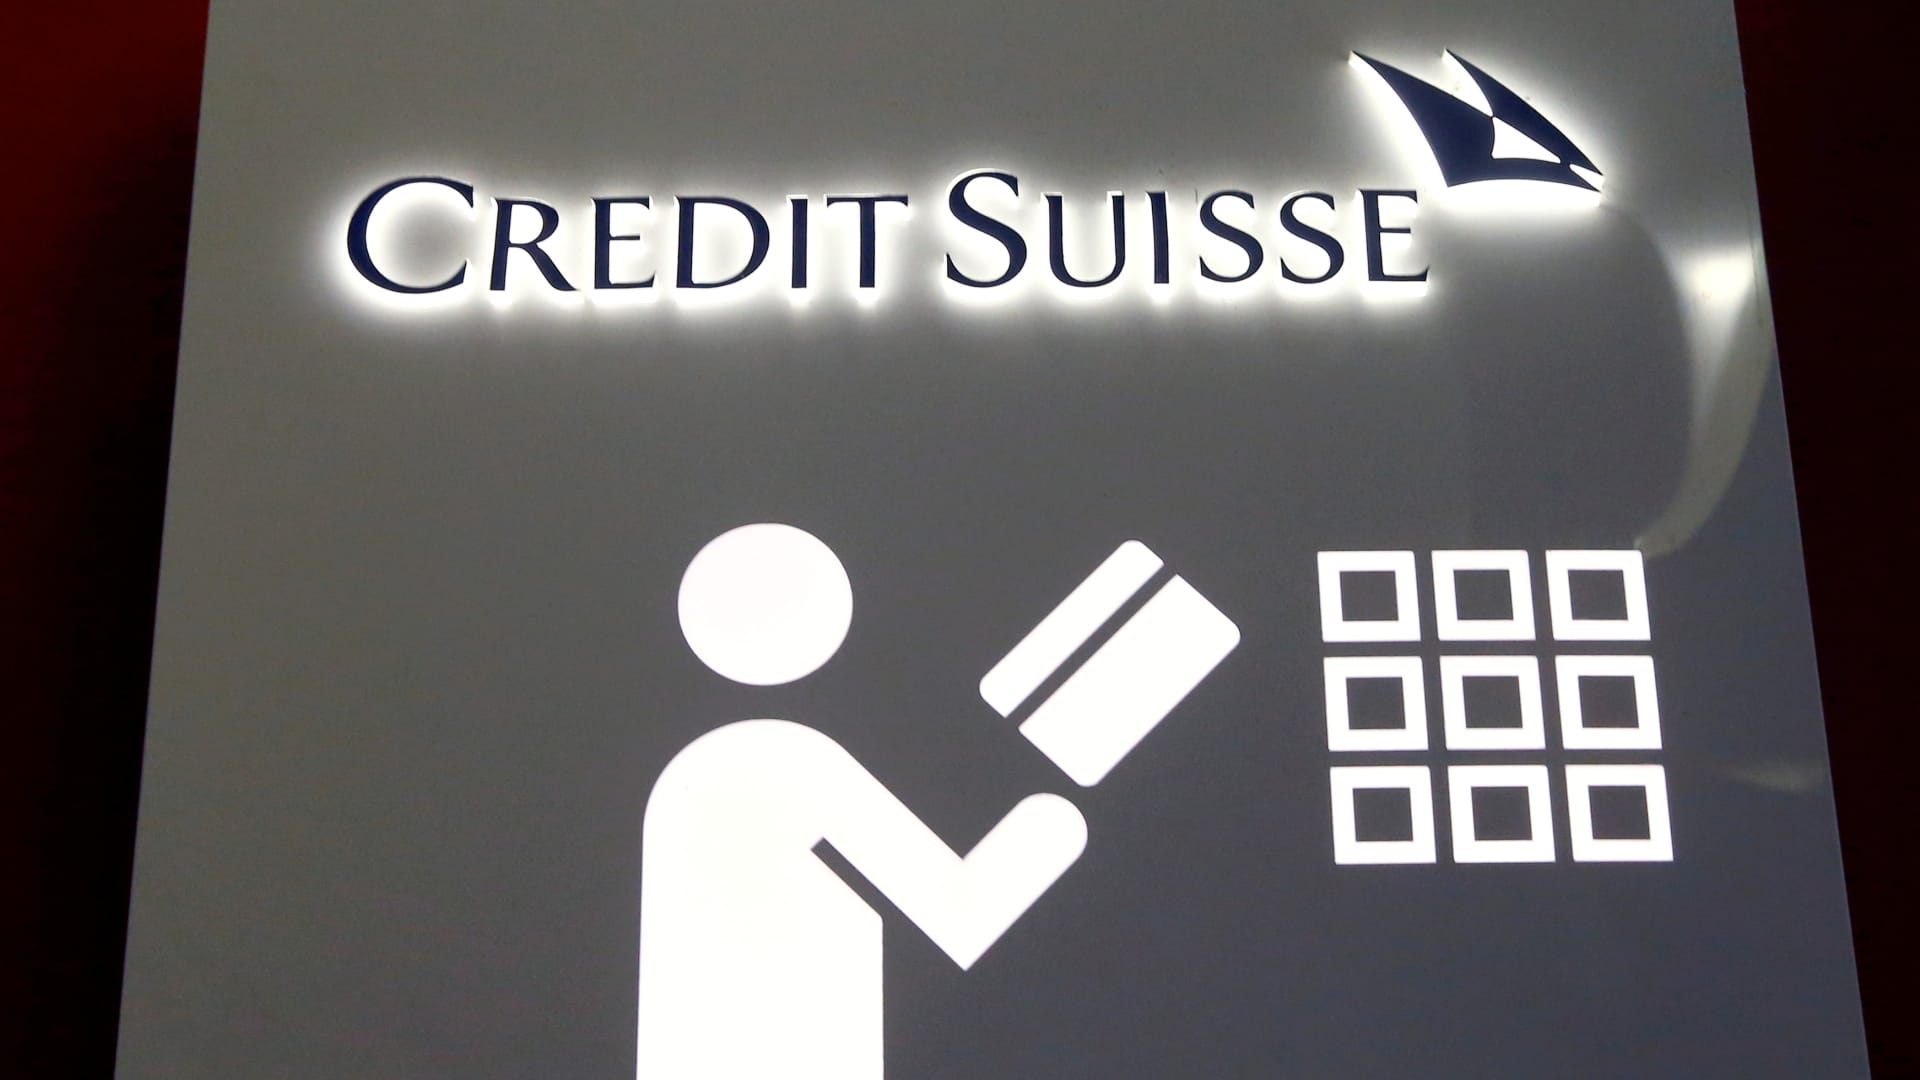 Credit Suisse chairman says Silicon Valley Bank crisis looks contained